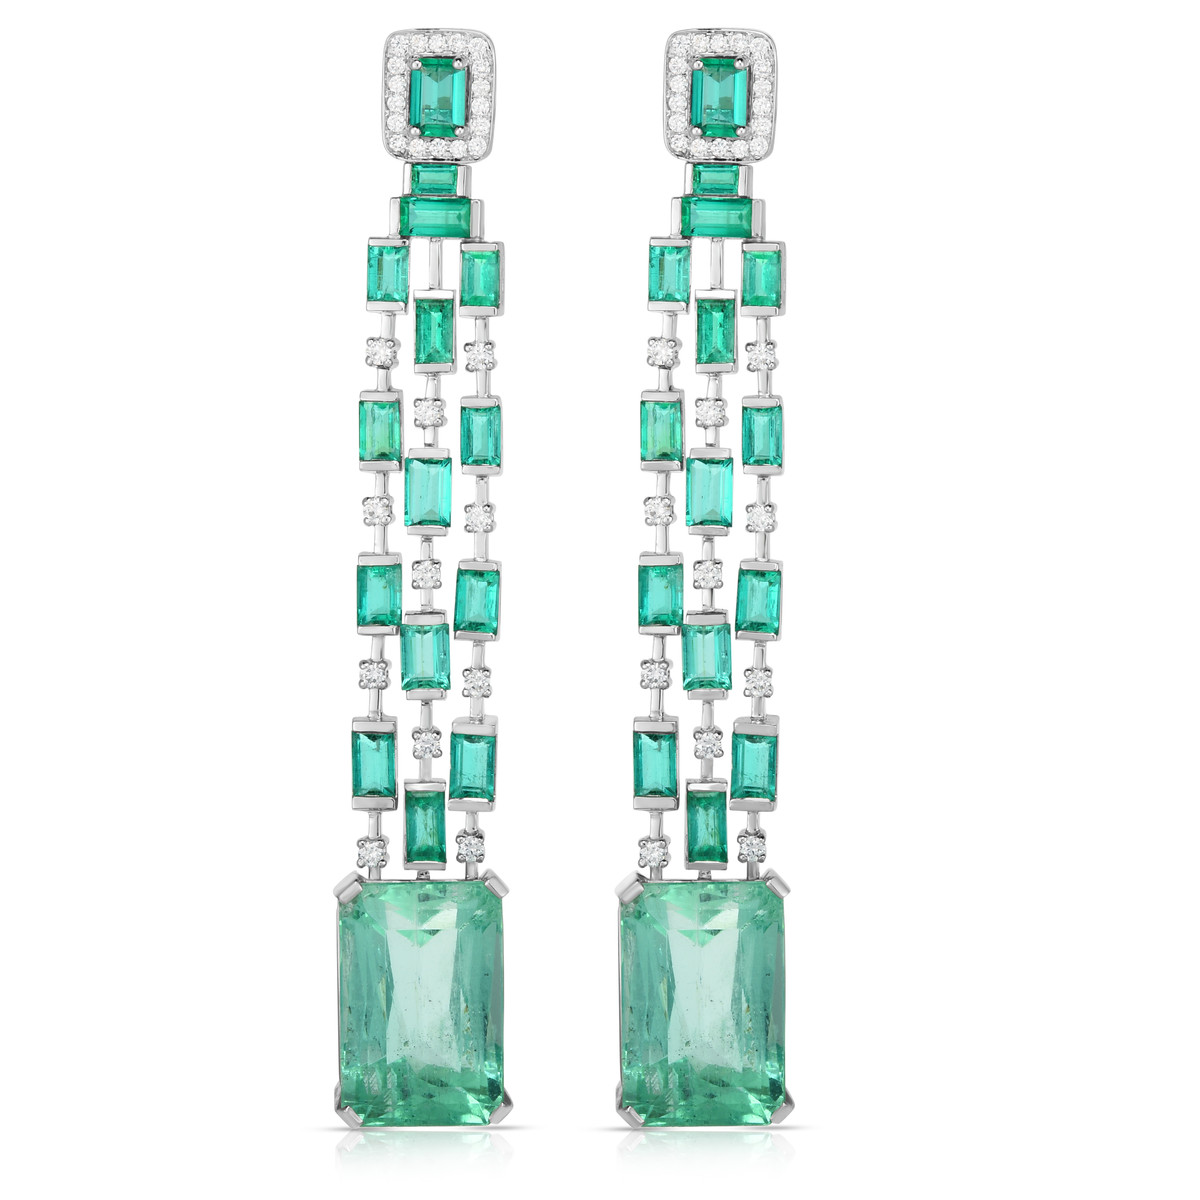 Hyde Park Collection 18K White Gold Emerald & Diamond Earrings-54472 Product Image